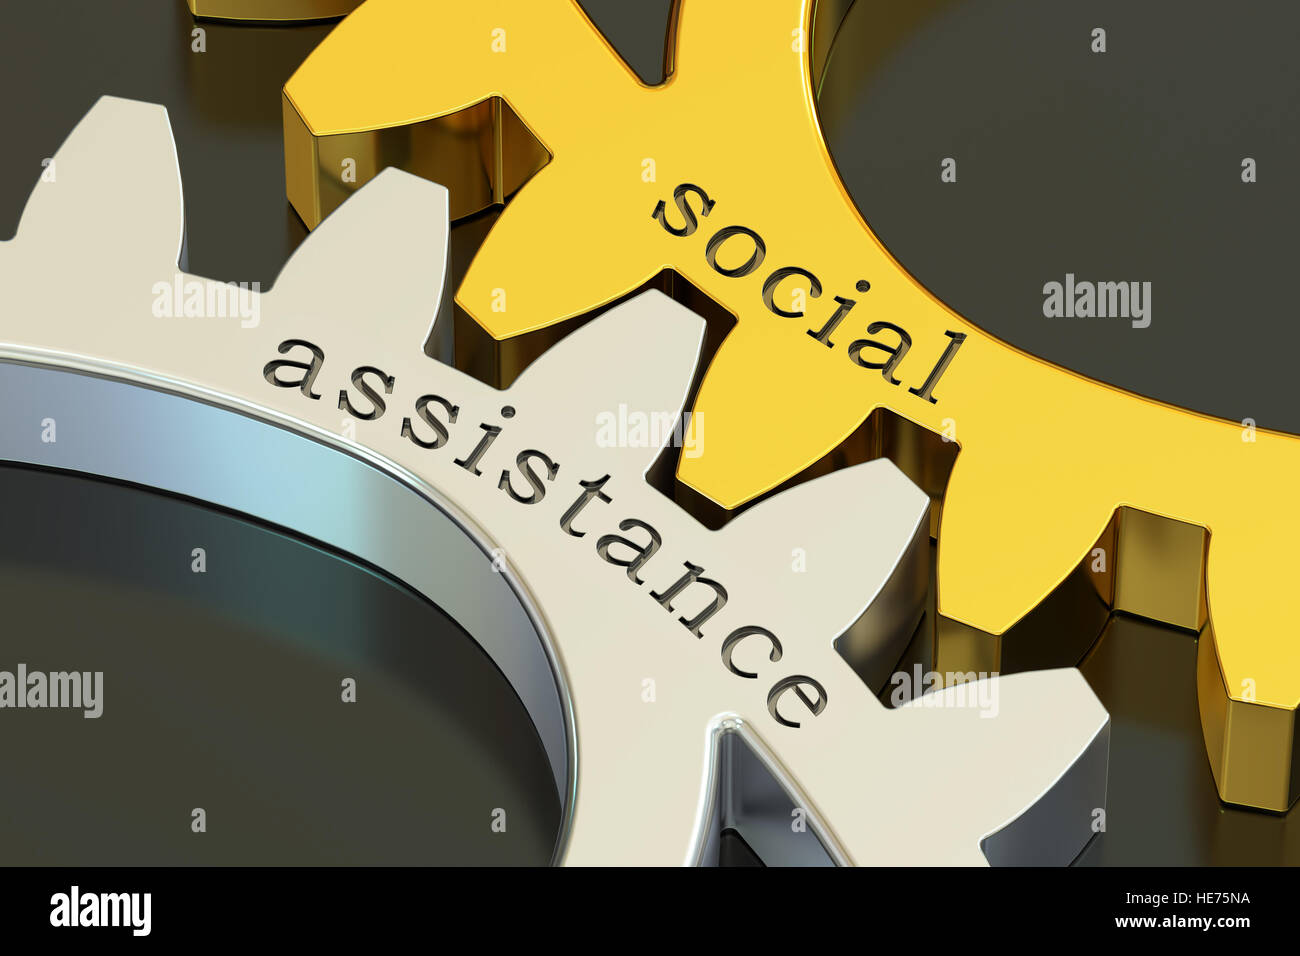 Social Assistance concept on the gearwheels, 3D rendering Stock Photo